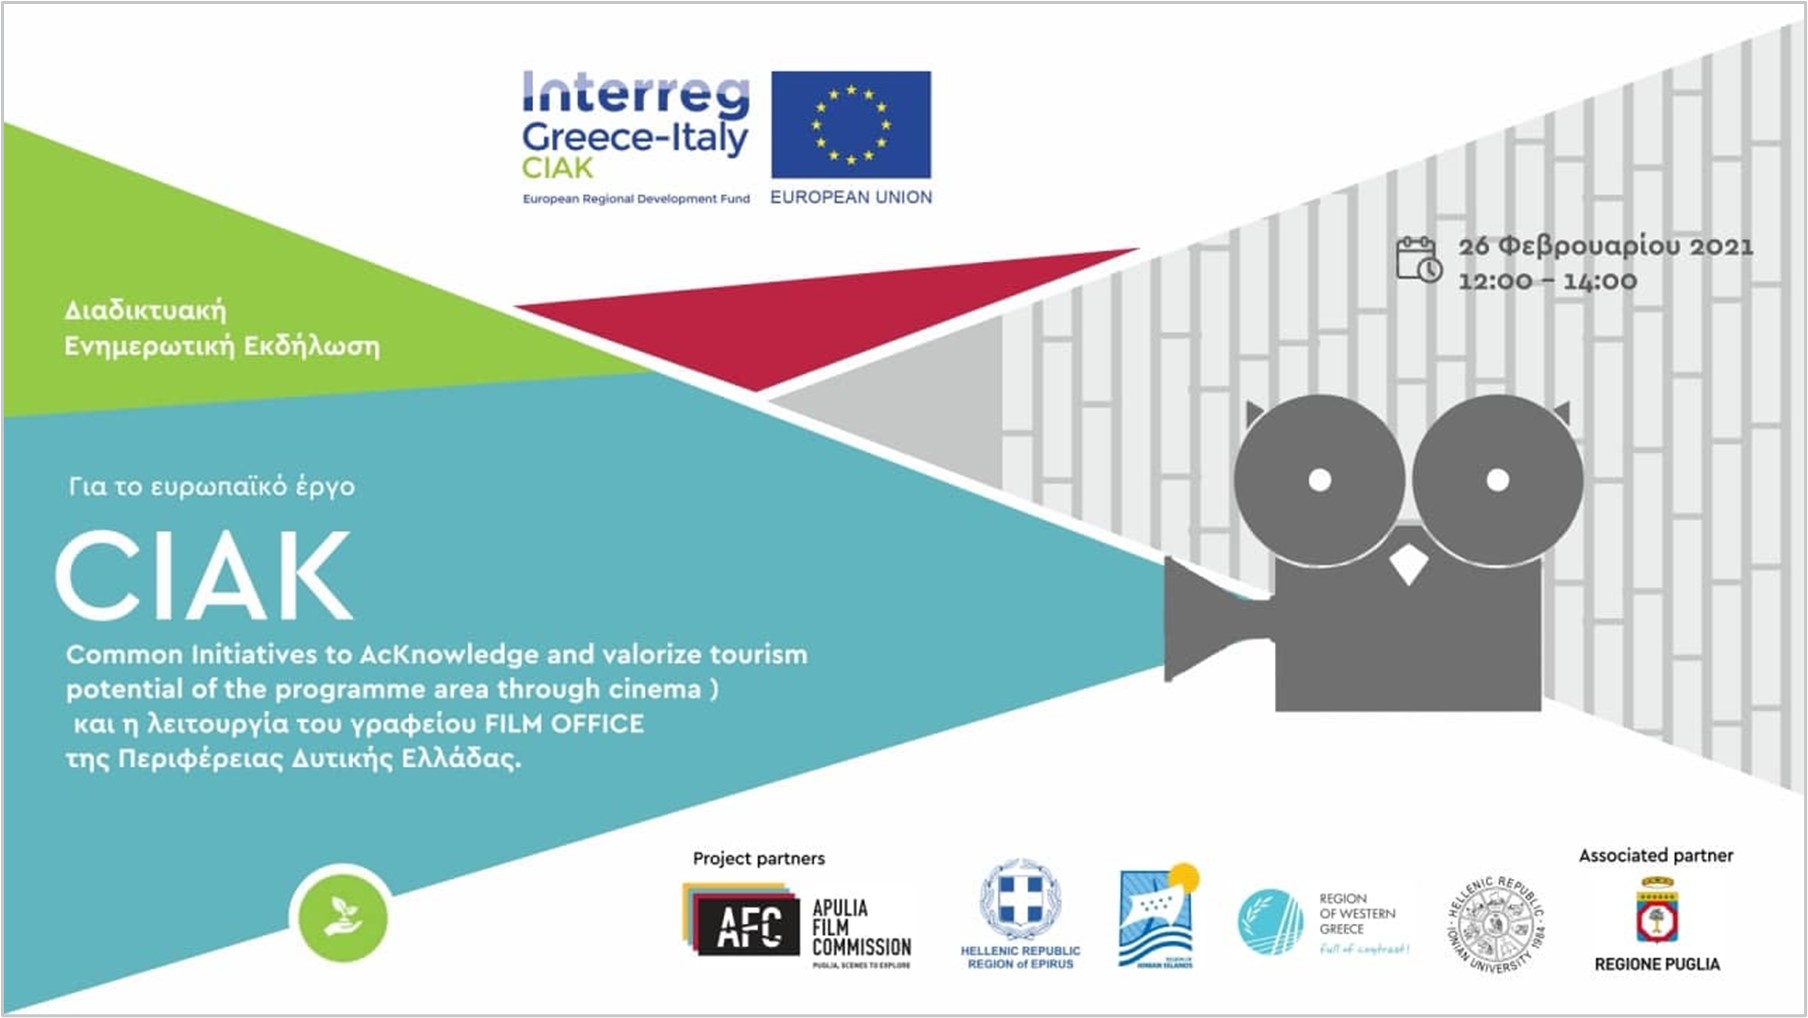 Online event for the completion of the European project Interreg CIAK and the operation of the Film Office of the Region of Western Greece